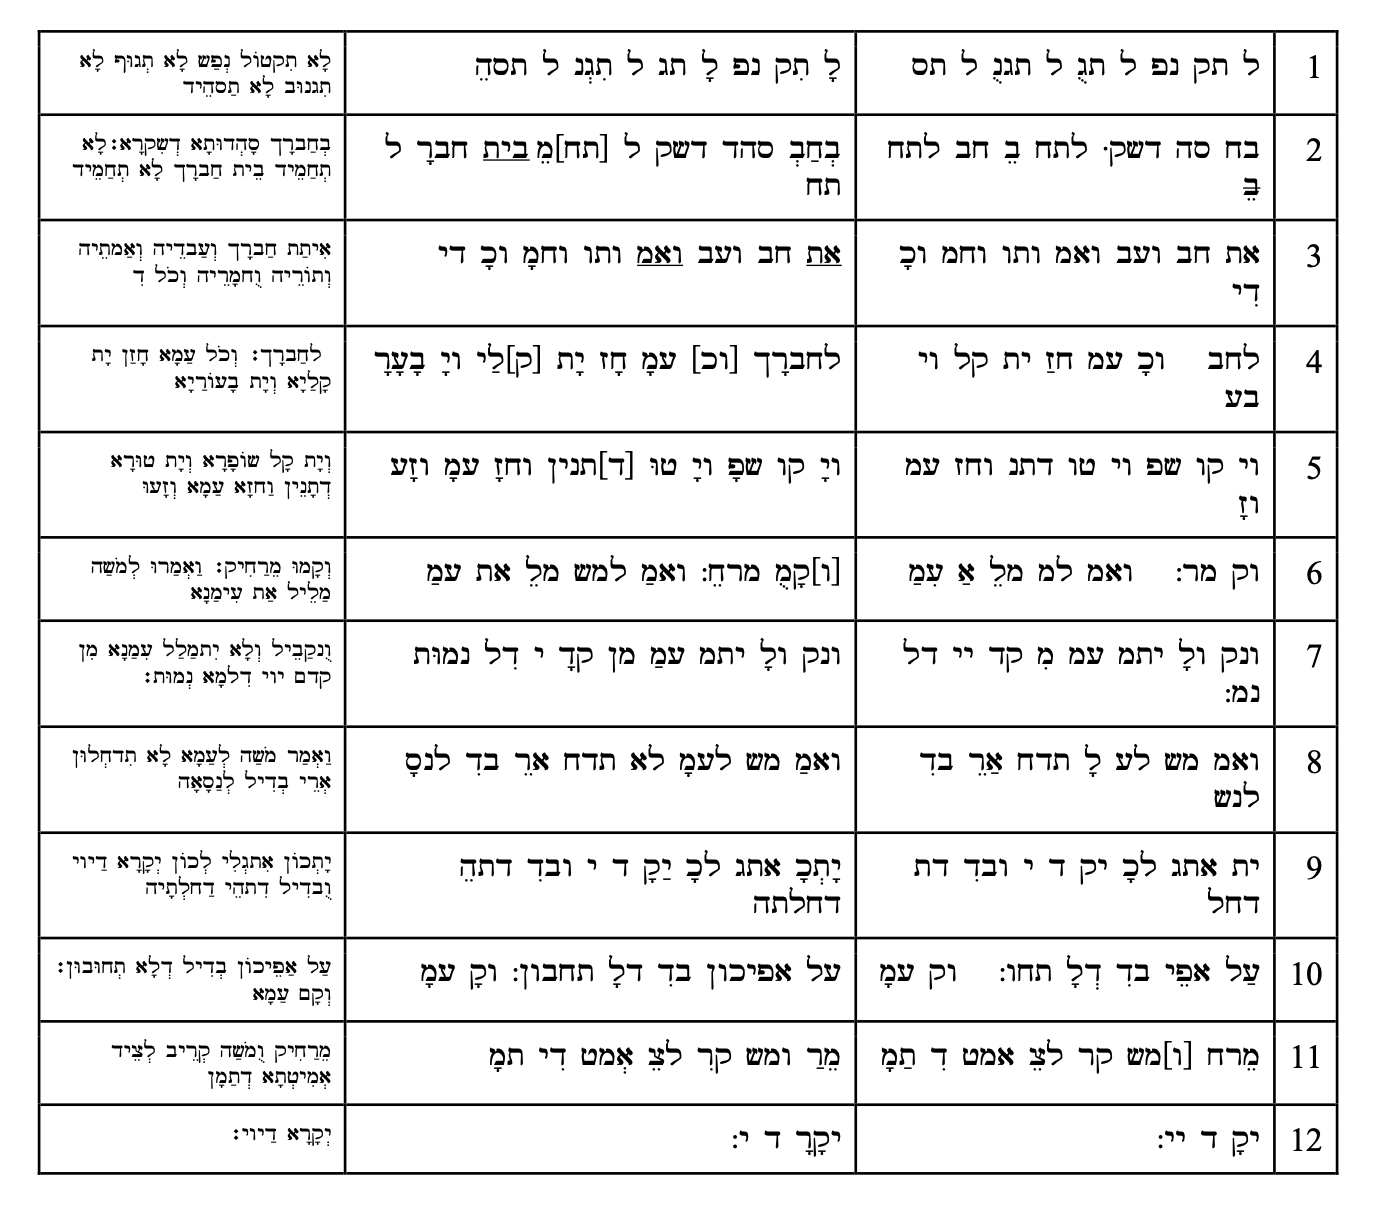 Table with transcription